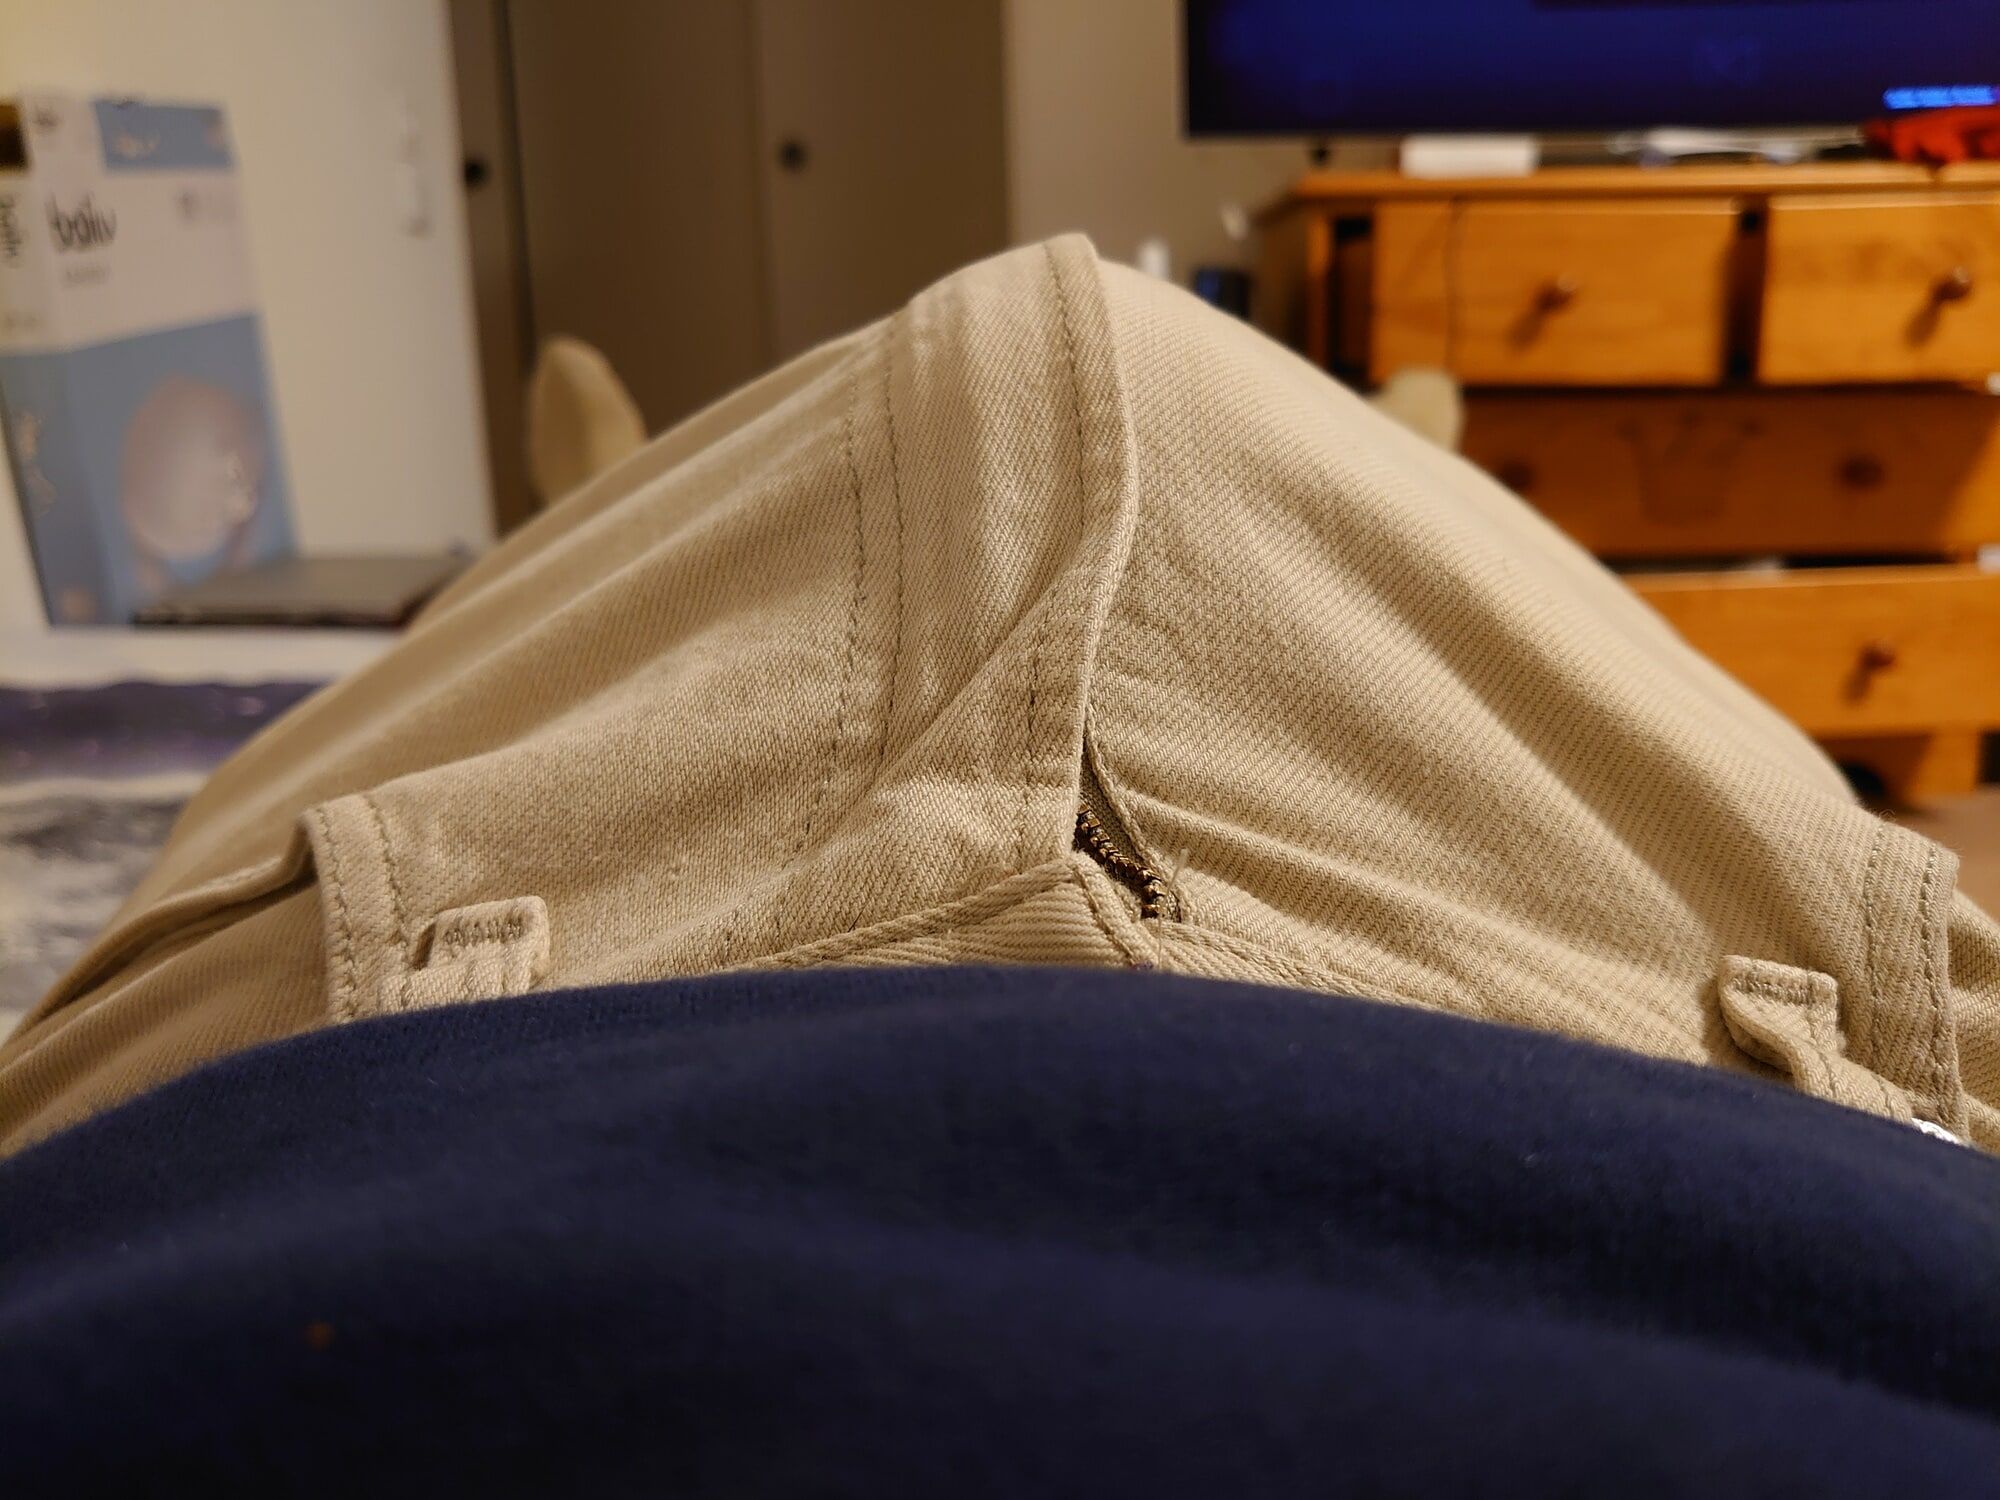 Erection in pants #19